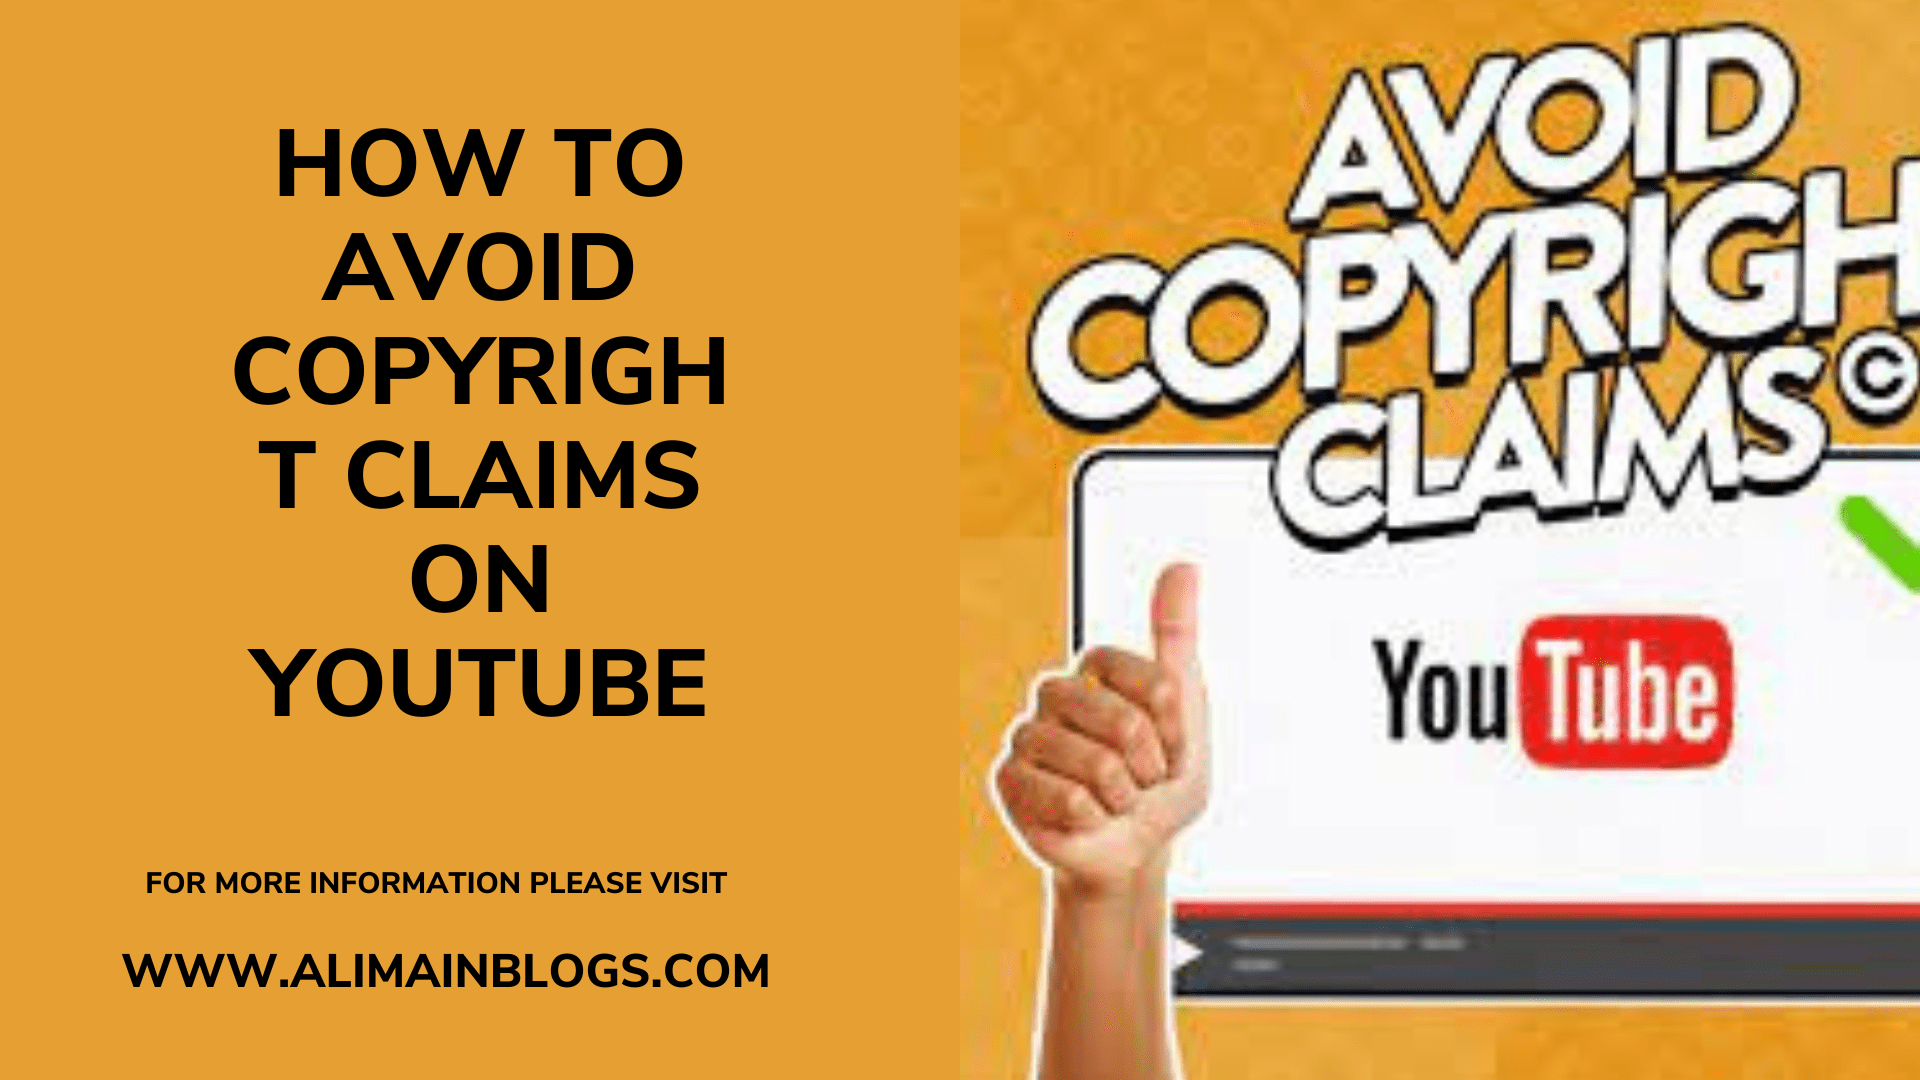 How to avoid copyright claims on youtube